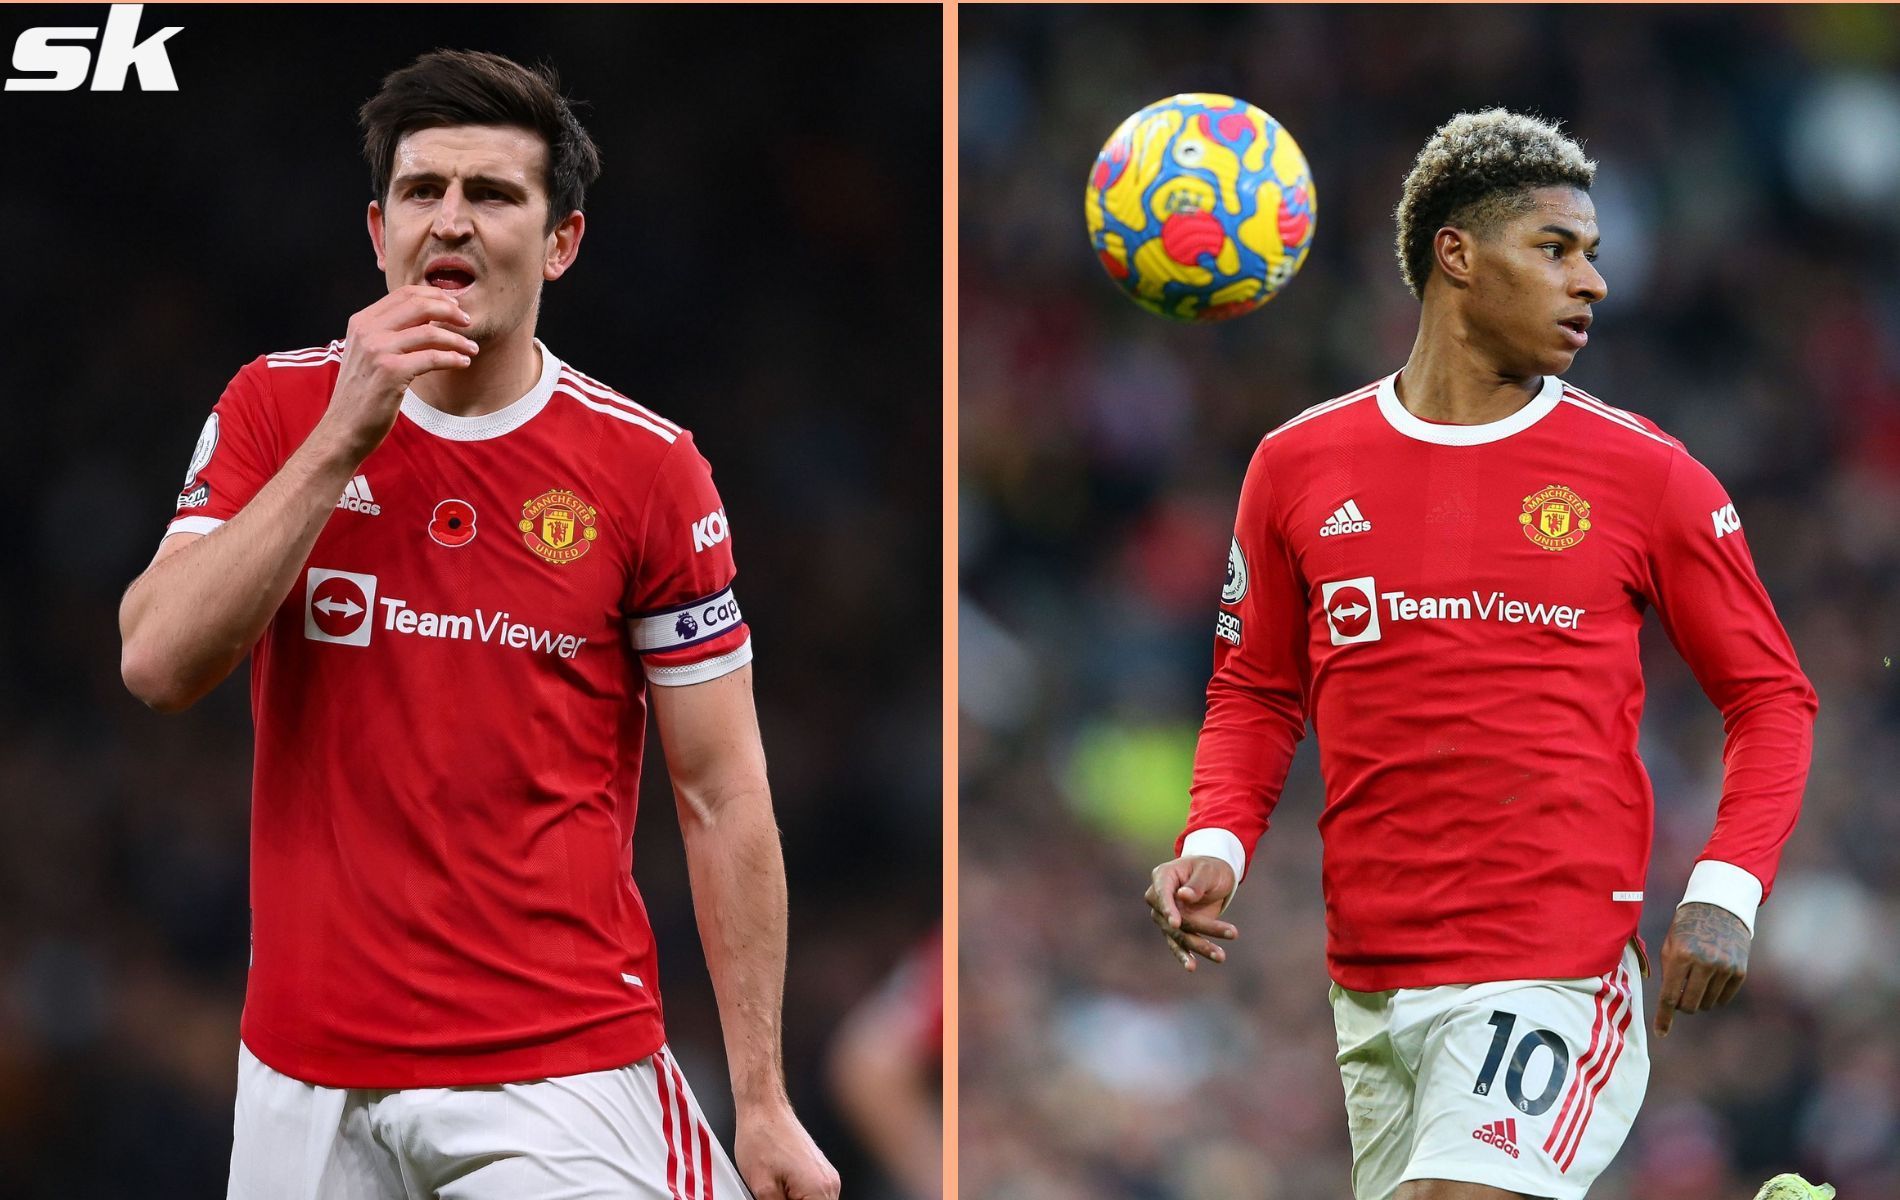 Manchester United players need to step up in 2022